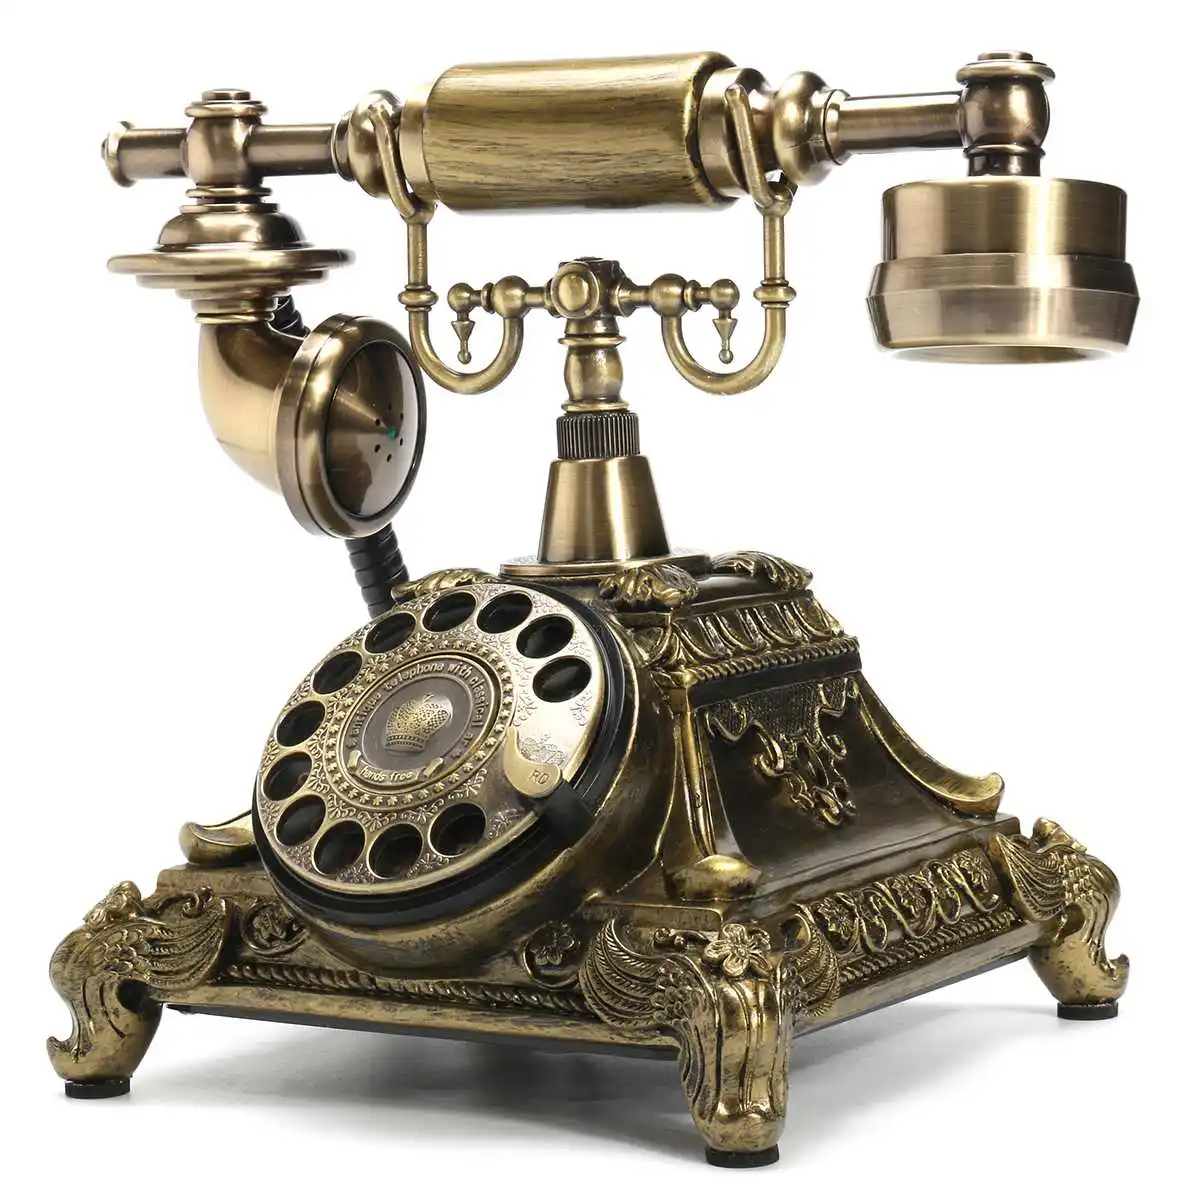 European Fashion Vintage Telephone Swivel Plate Rotary Dial Telephone Antique Telephones Landline Phone For Office Home Hotel